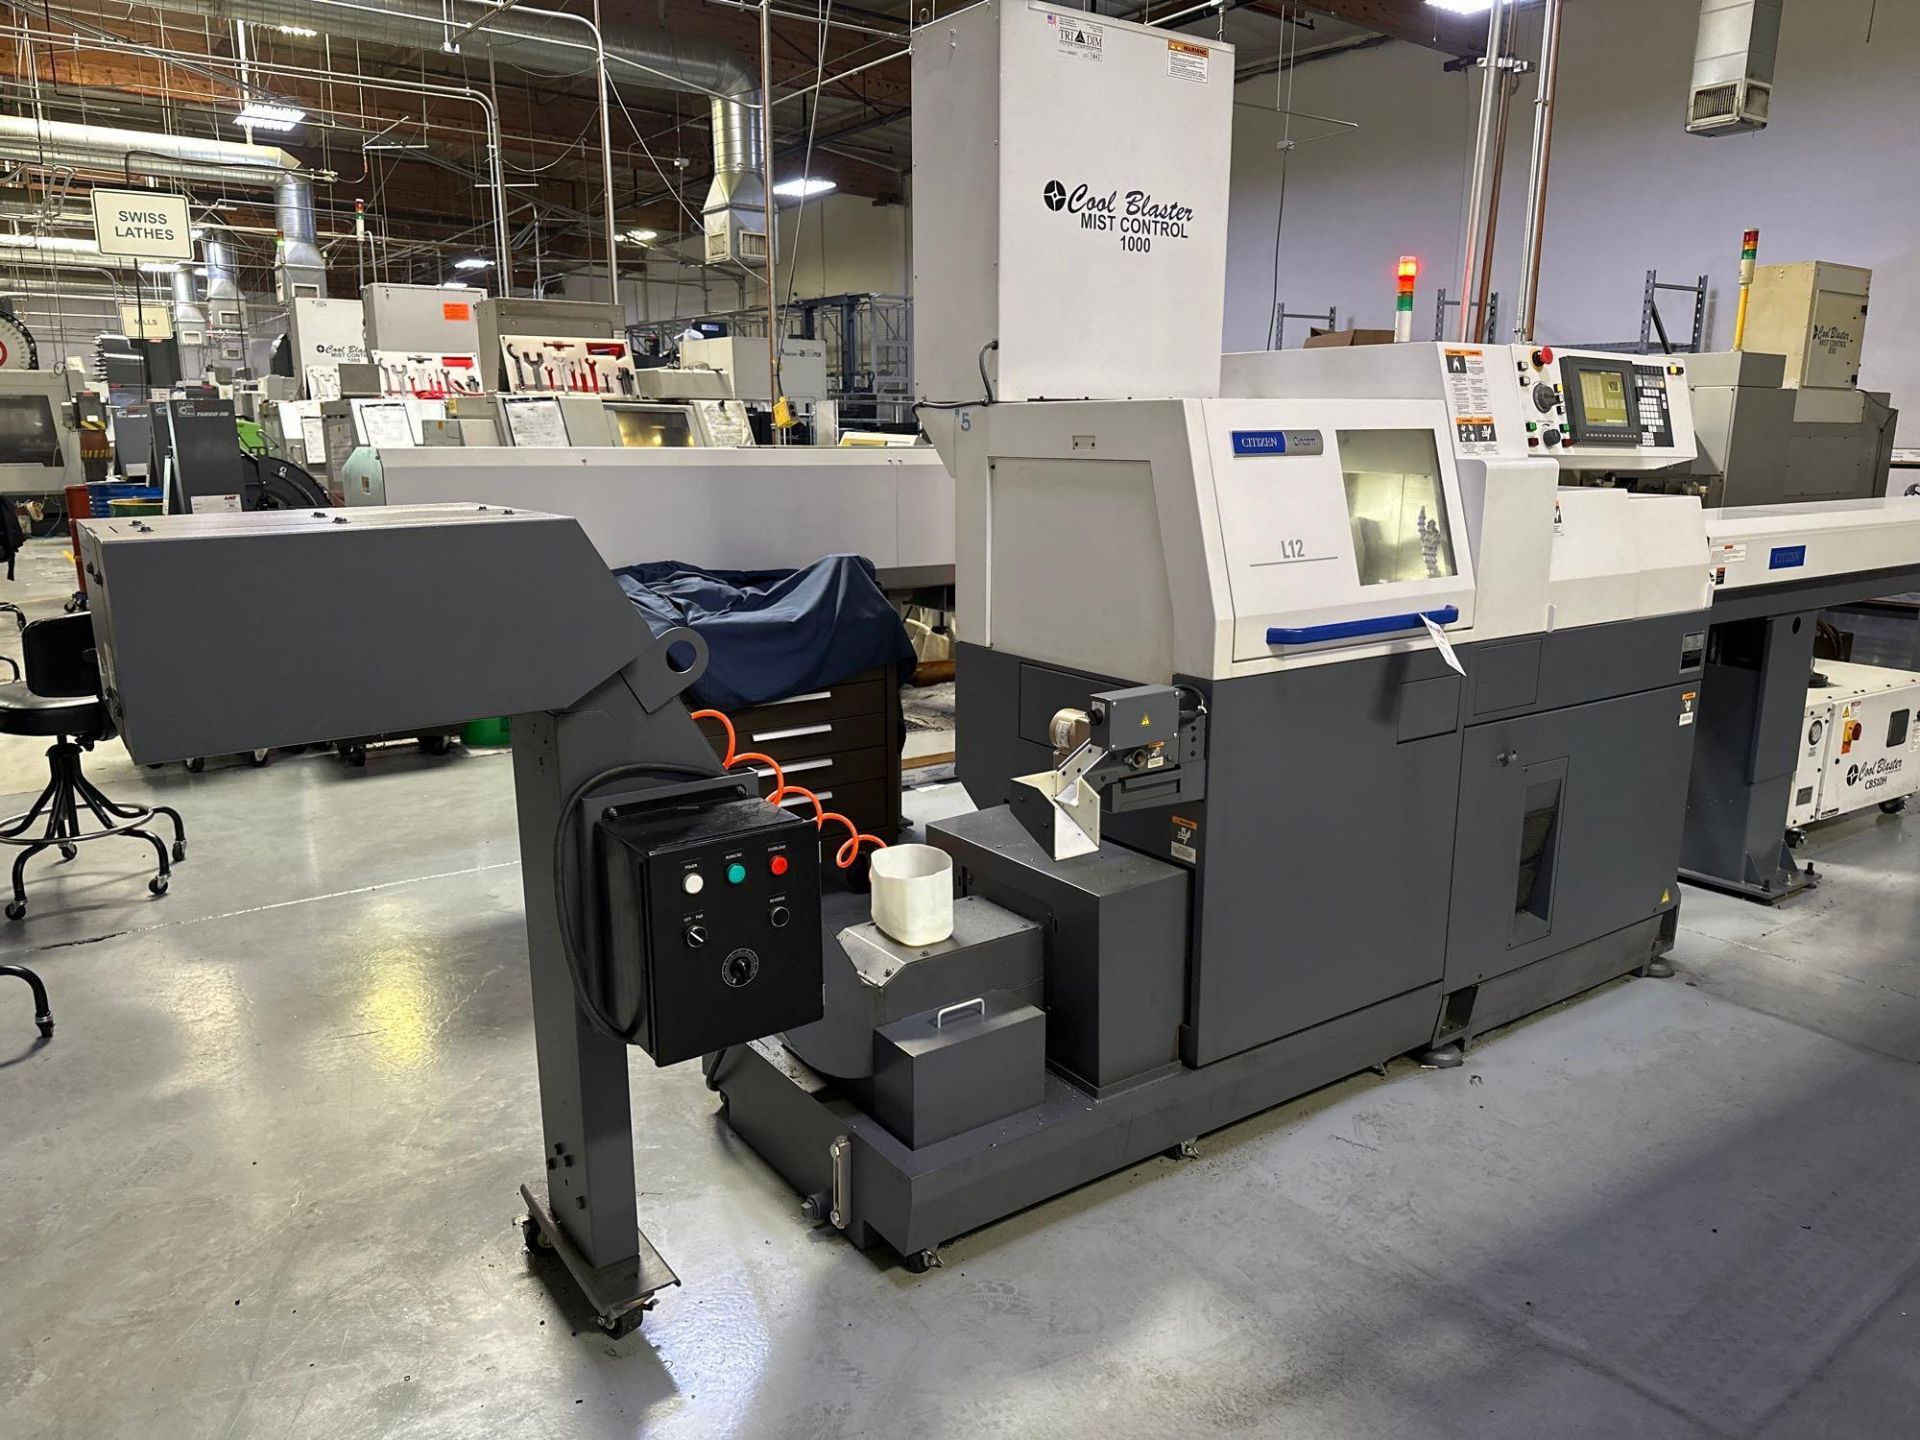 Citizen L12-1M7 6-Axis Swiss CNC Lathe, 18 Station Tool Holders *Delayed for sale in July* - Image 3 of 14